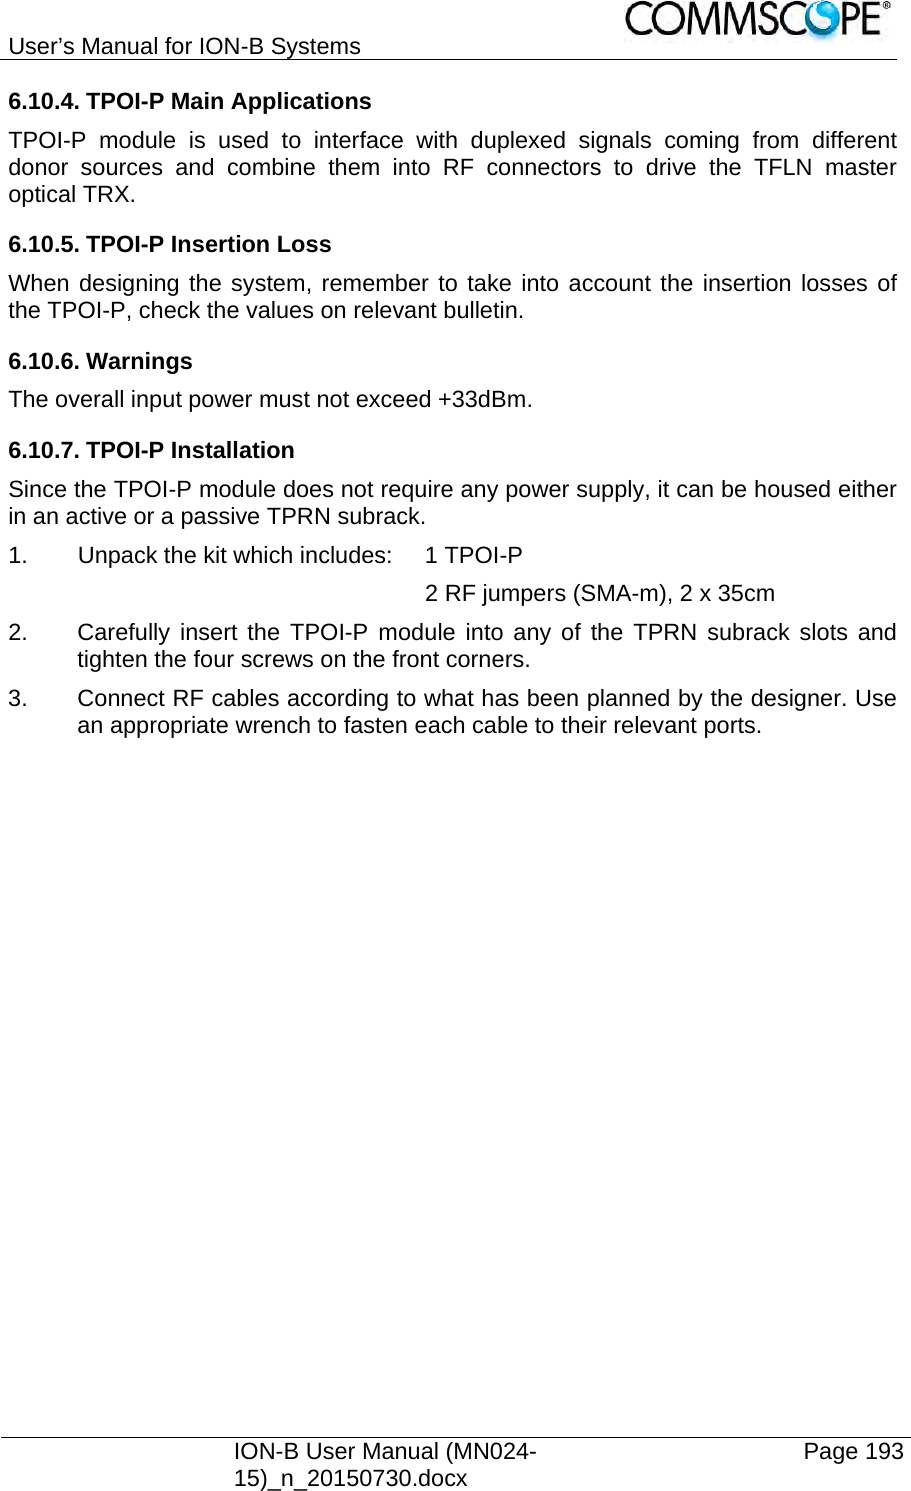 User’s Manual for ION-B Systems    ION-B User Manual (MN024-15)_n_20150730.docx  Page 193 6.10.4. TPOI-P Main Applications TPOI-P module is used to interface with duplexed signals coming from different donor sources and combine them into RF connectors to drive the TFLN master optical TRX. 6.10.5. TPOI-P Insertion Loss  When designing the system, remember to take into account the insertion losses of the TPOI-P, check the values on relevant bulletin. 6.10.6. Warnings The overall input power must not exceed +33dBm. 6.10.7. TPOI-P Installation Since the TPOI-P module does not require any power supply, it can be housed either in an active or a passive TPRN subrack. 1.  Unpack the kit which includes:  1 TPOI-P             2 RF jumpers (SMA-m), 2 x 35cm 2.  Carefully insert the TPOI-P module into any of the TPRN subrack slots and tighten the four screws on the front corners. 3.  Connect RF cables according to what has been planned by the designer. Use an appropriate wrench to fasten each cable to their relevant ports.    